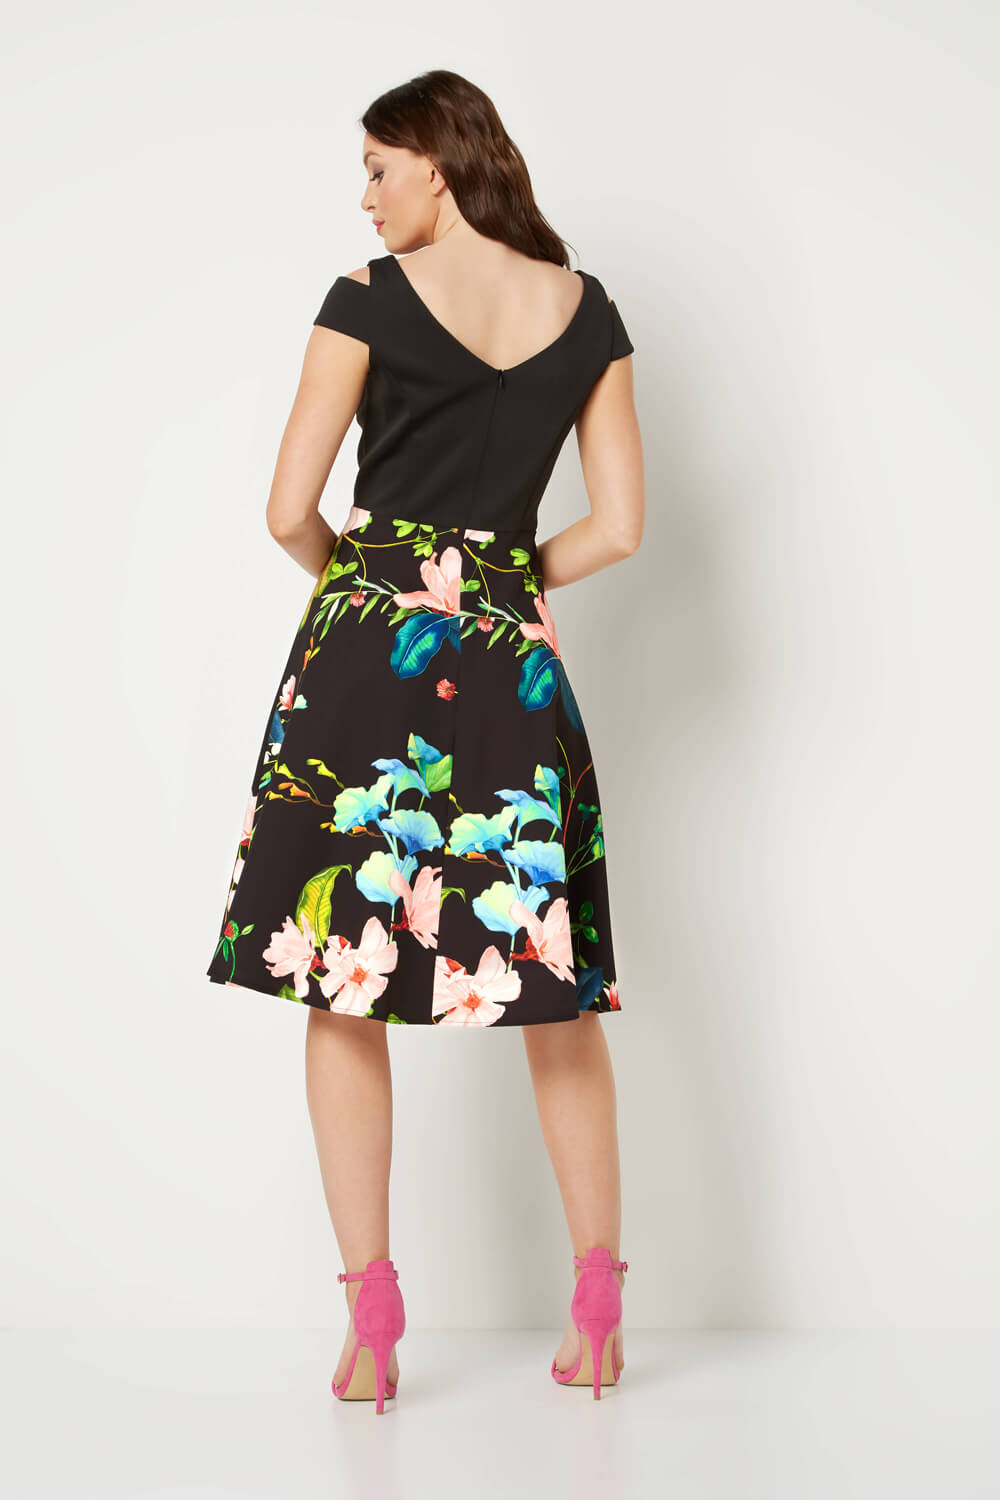 Black Floral Print Fit and Flare Scuba Dress, Image 3 of 4